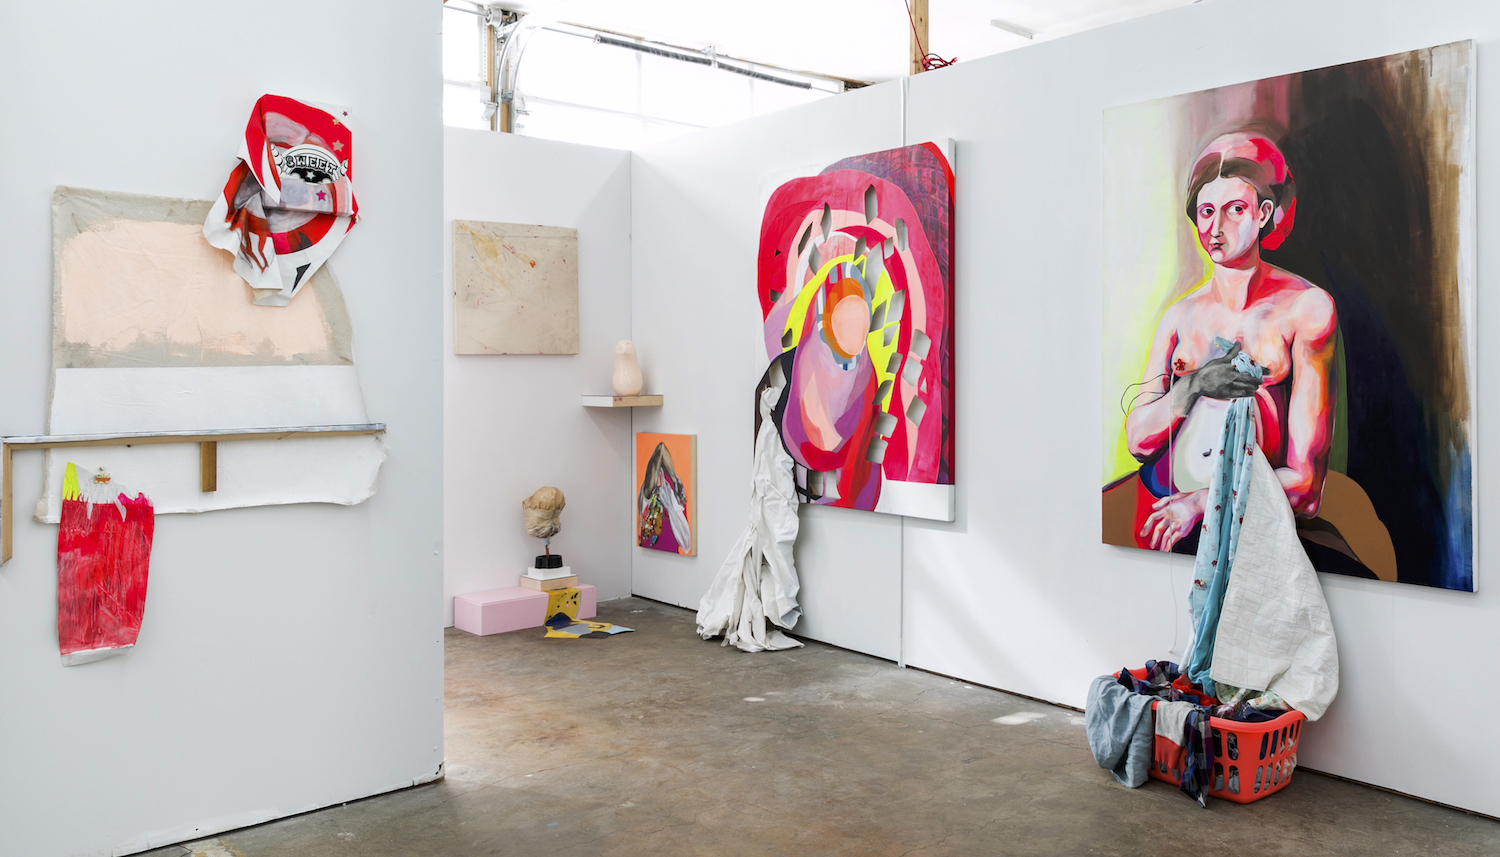 Installation view from Rips